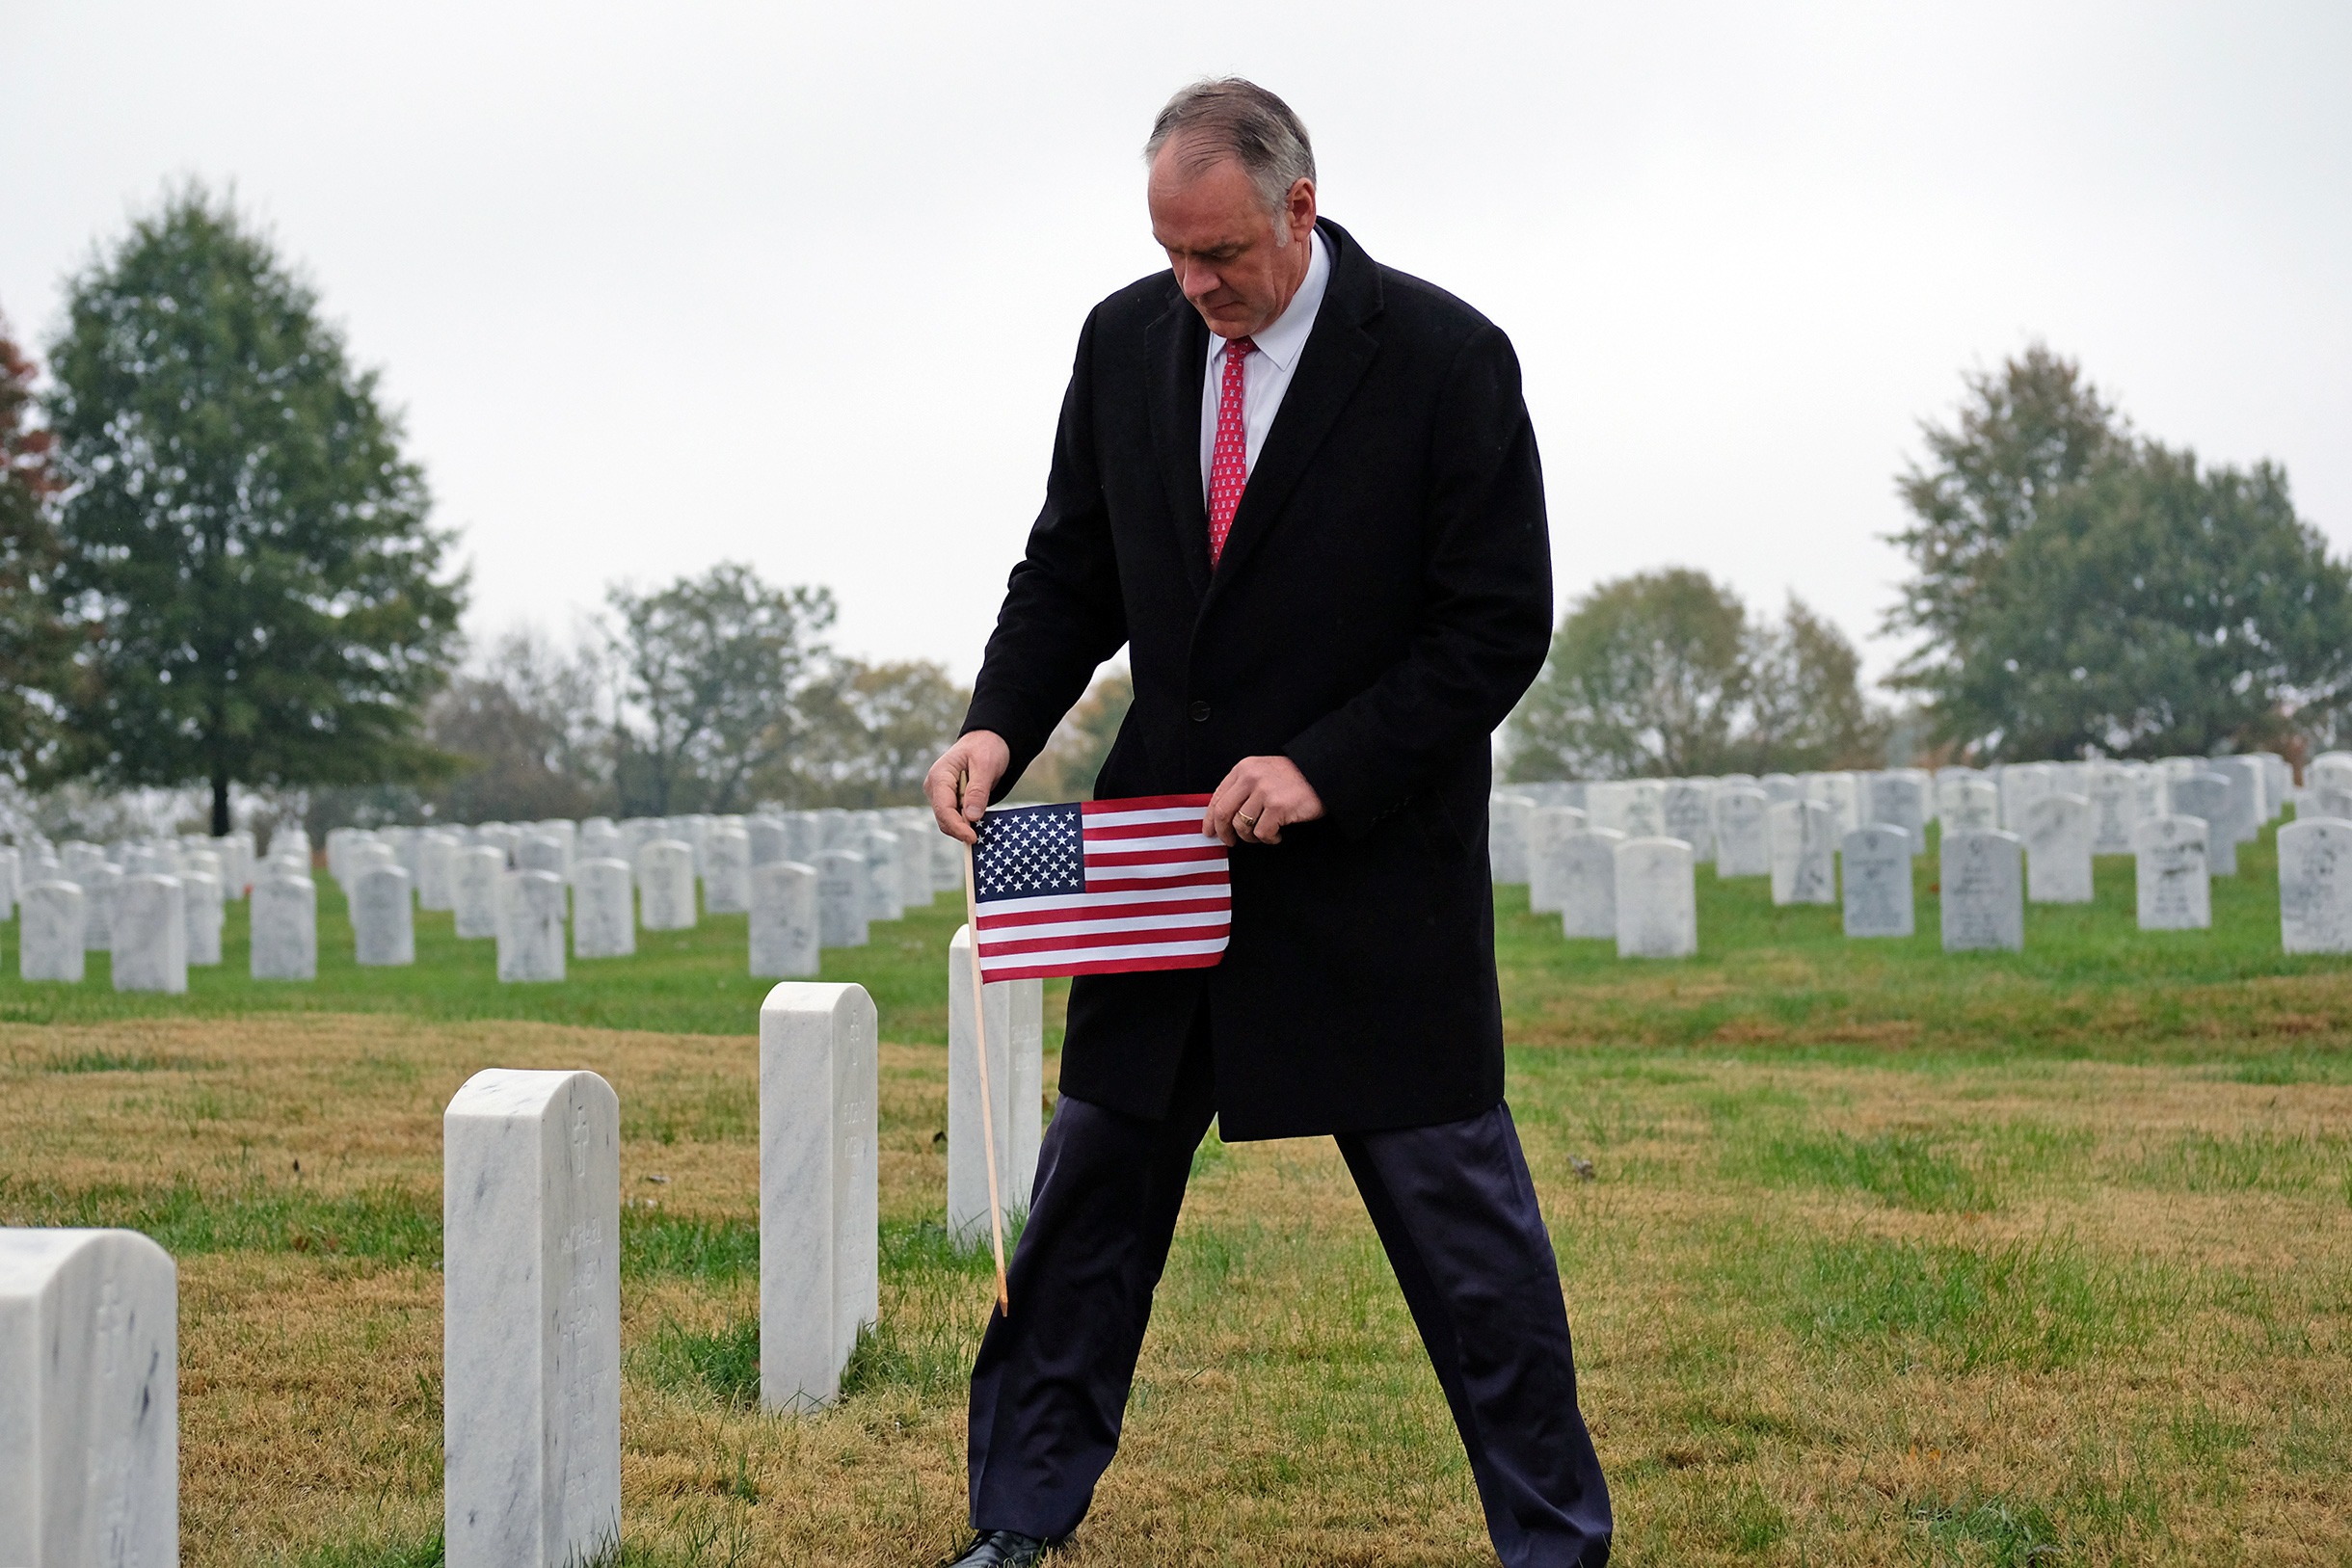 PHOTO: U.S. Interior Secretary Ryan Zinke holds a flag in the Camp Nelson National Cemetery in Nicholasville, Ky.